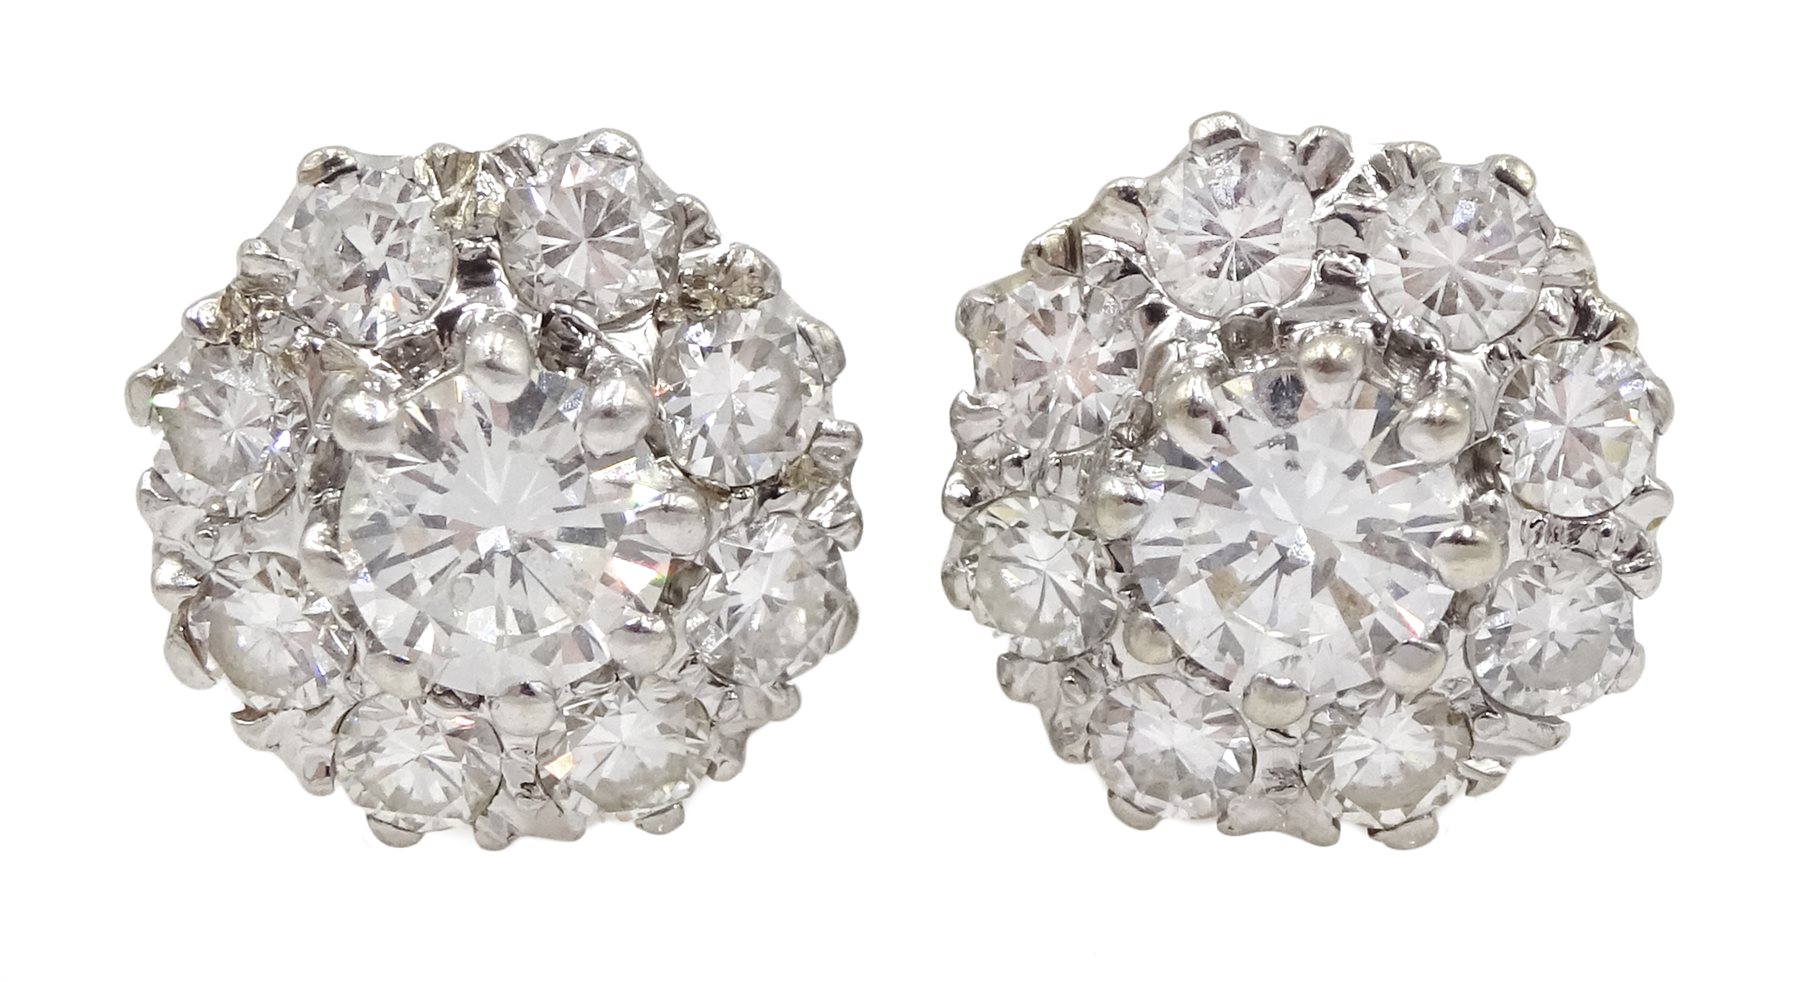 Pair of gold diamond cluster stud earrings, each central diamond approx 0.25 carat